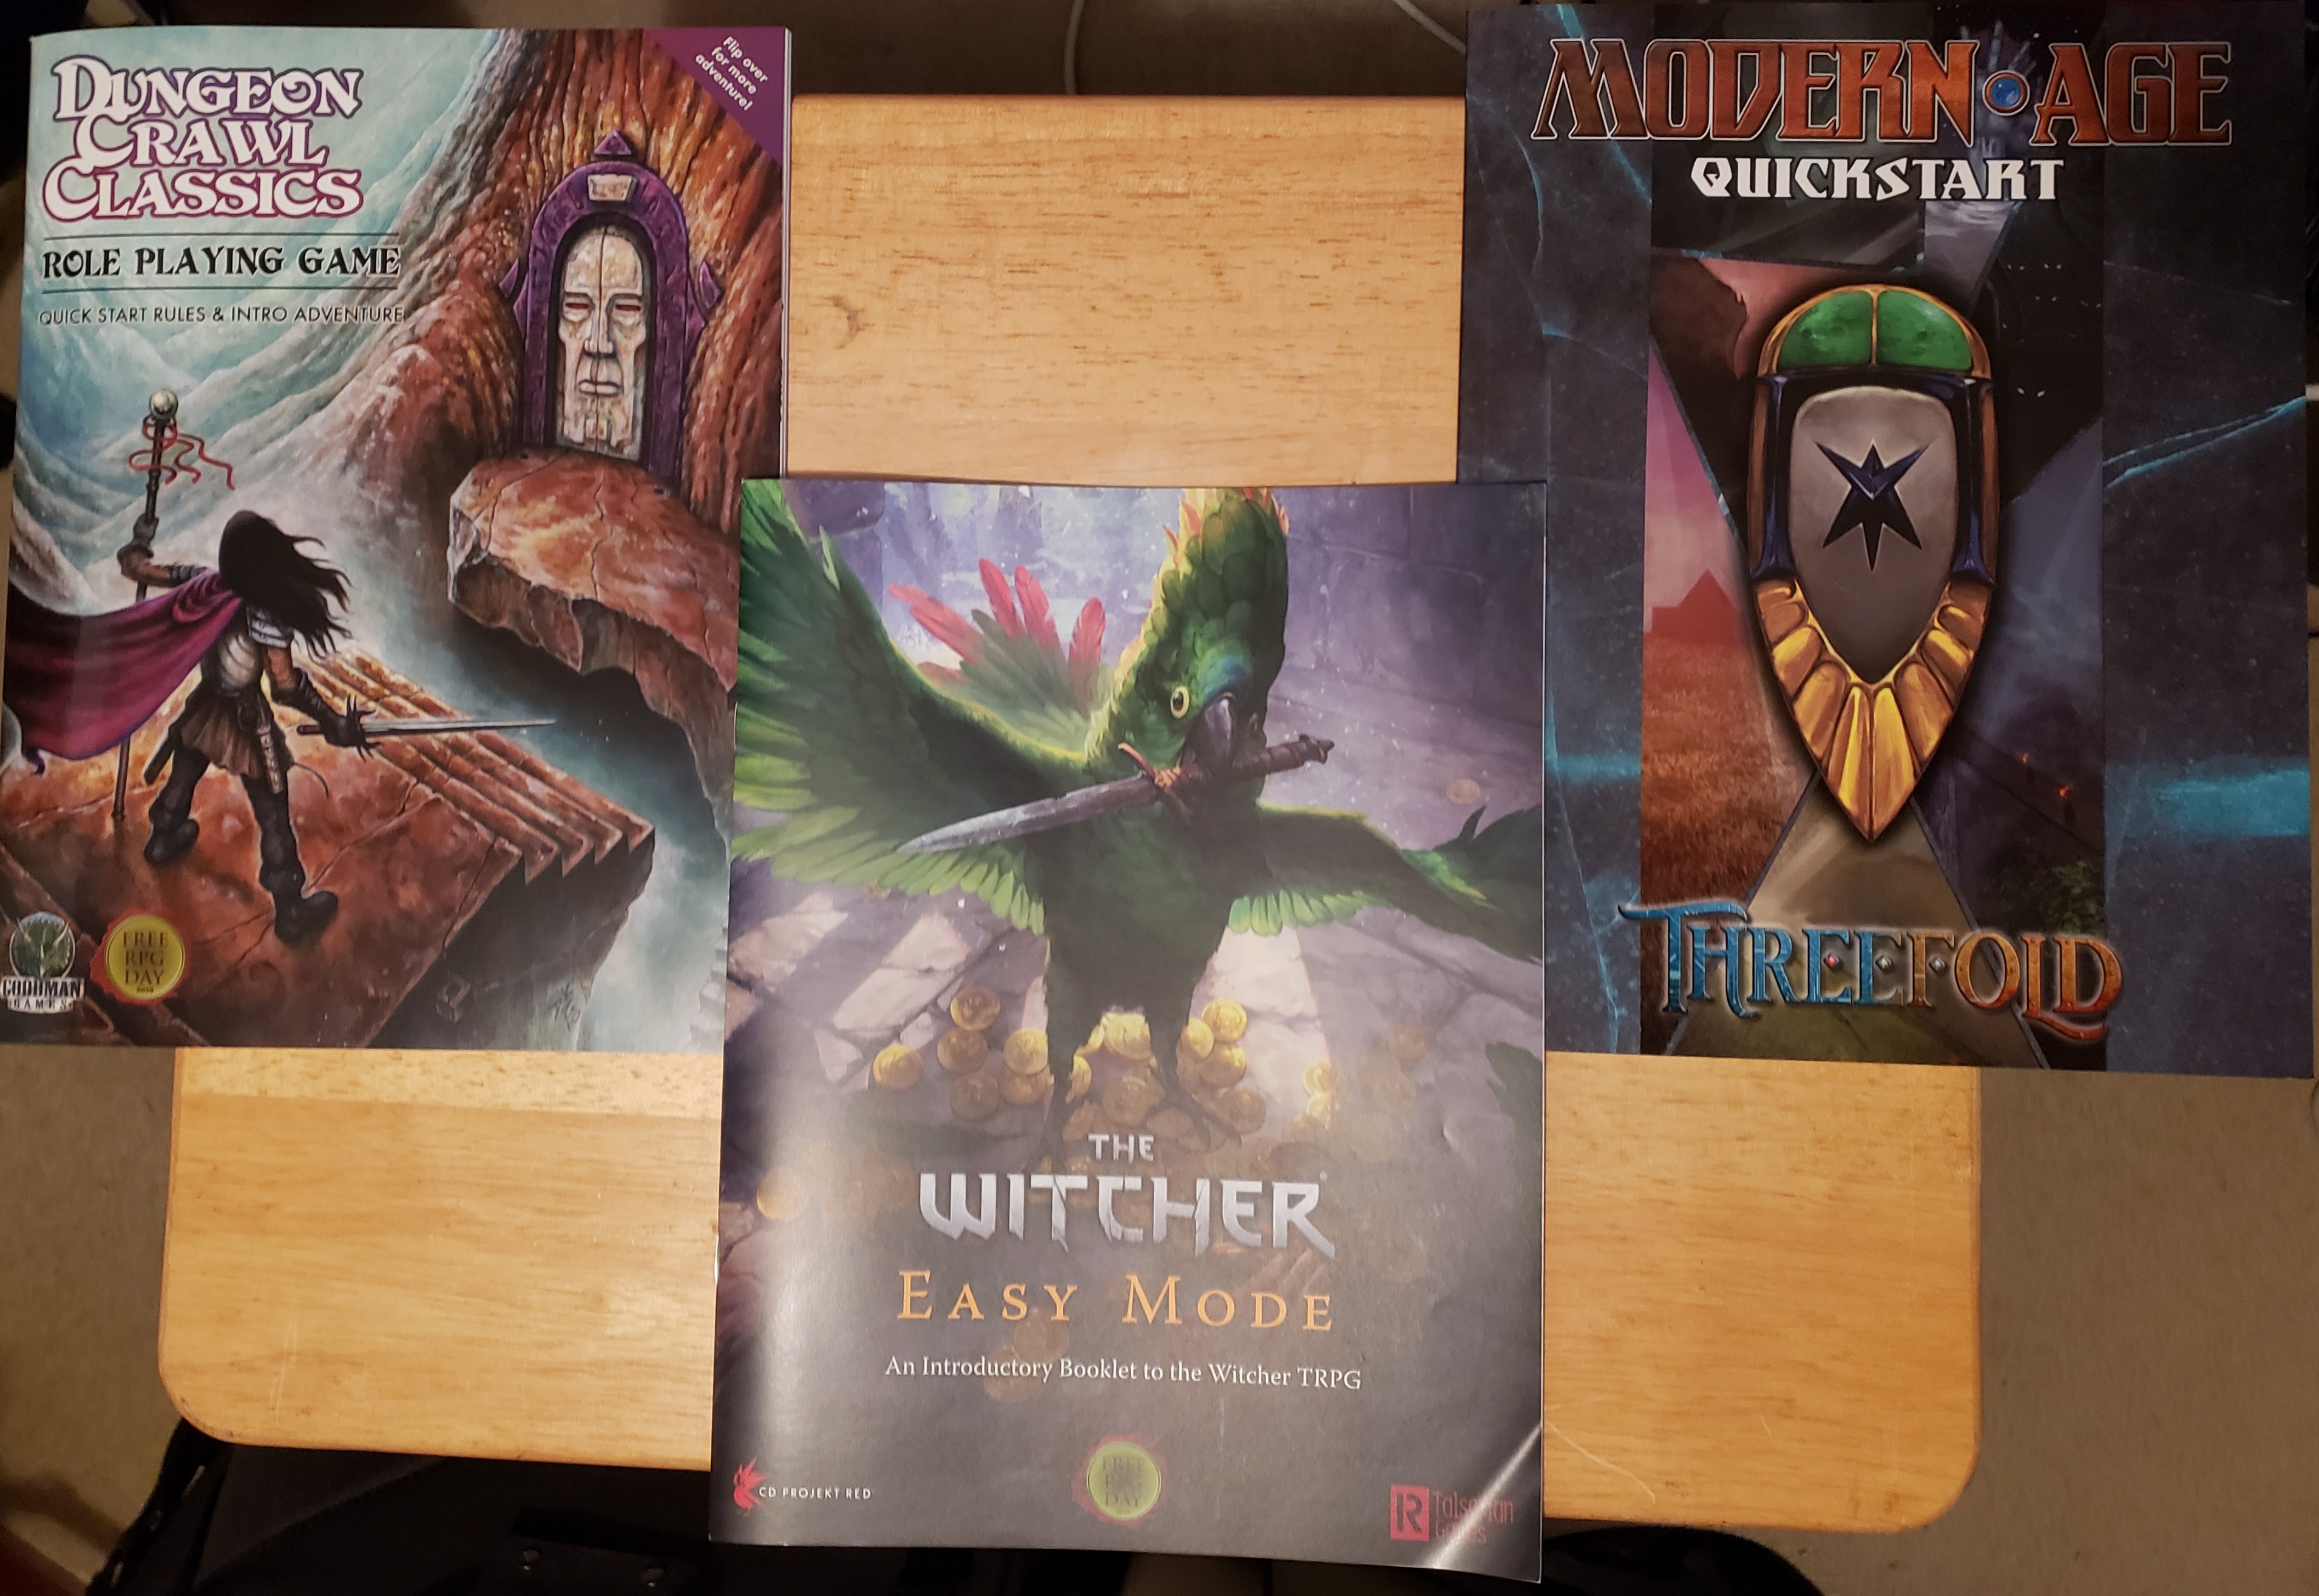 CD Projekt Red 2019 Free RPG Day THE WITCHER EASY MODE An Introductory Booklet